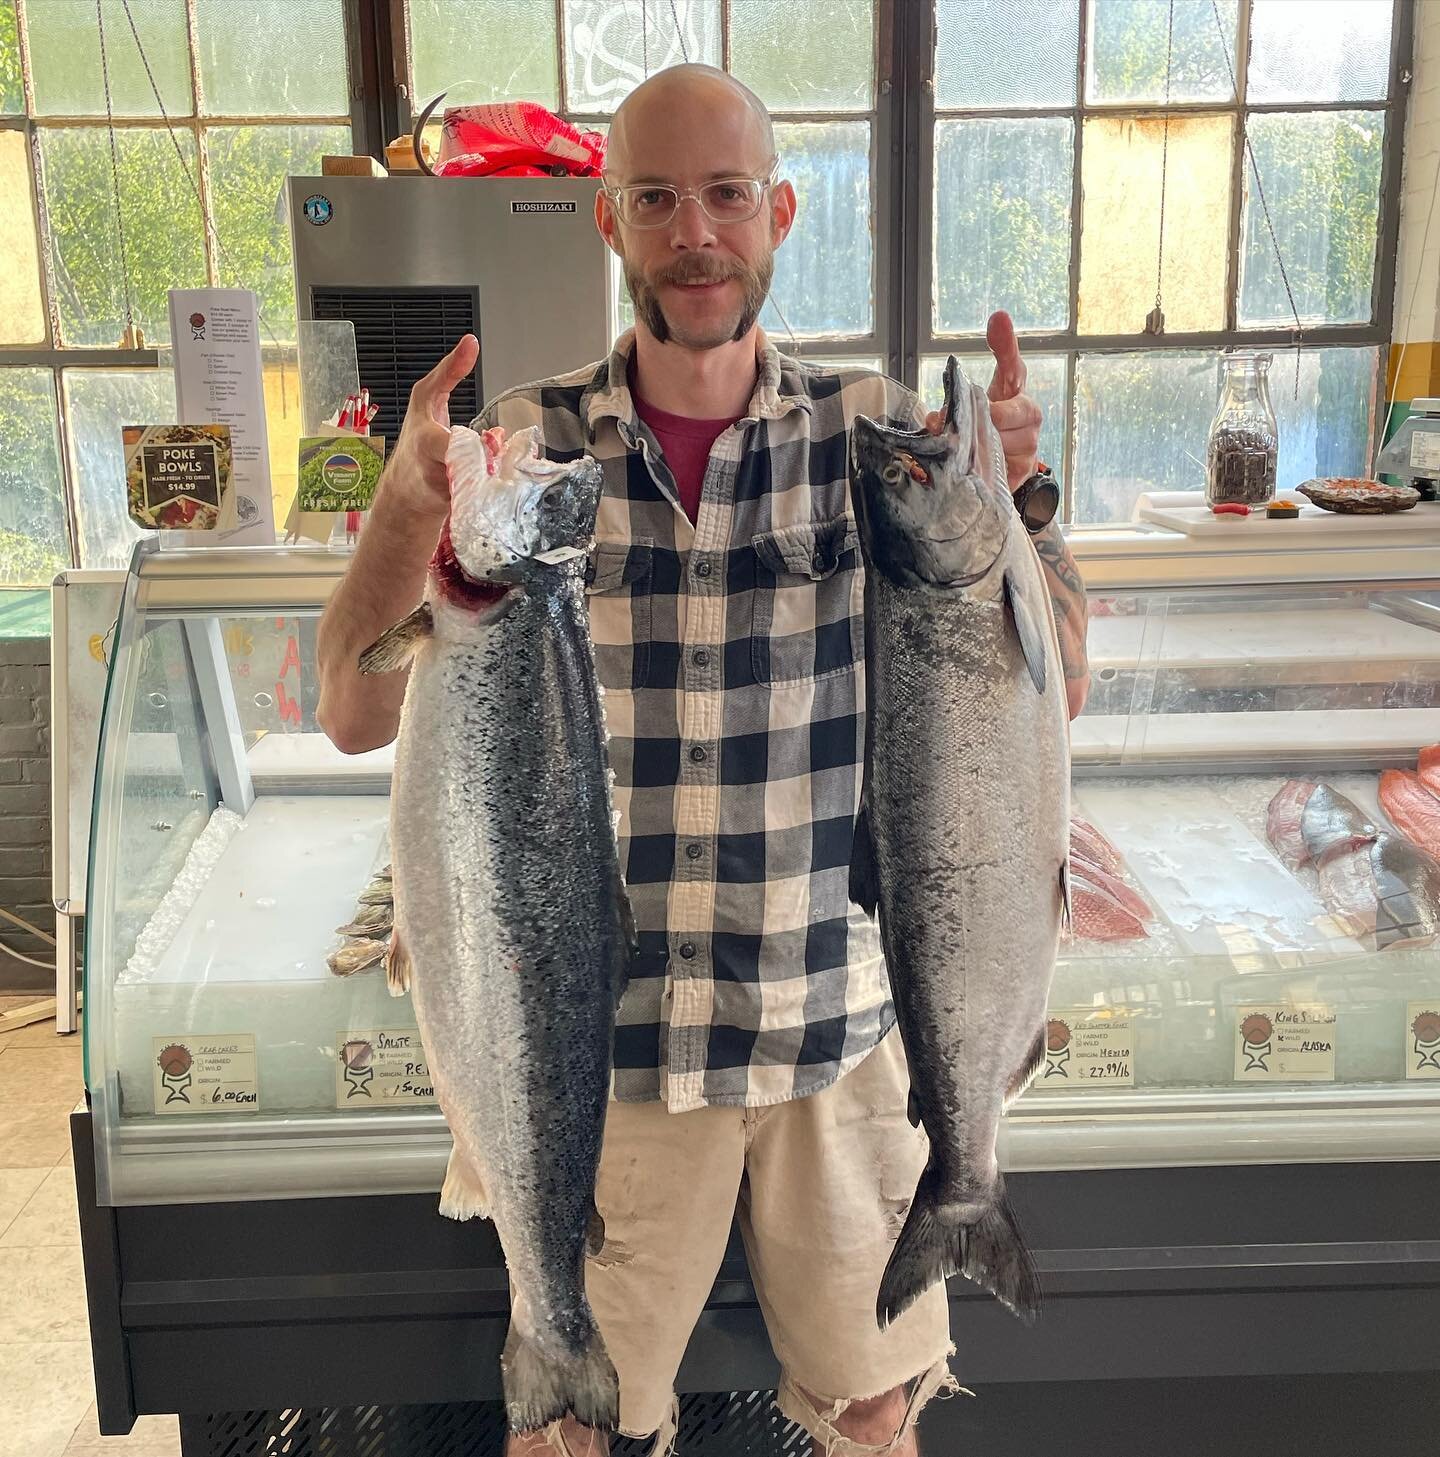 Wild Alaskan troll caught King Salmon vs Farm raised Faroe Island Salmon from @hiddenfjord . I managed to grab one wild king salmon at market this week. Limited quantity so catch it while you can this week! We&rsquo;ll talk more about the differences